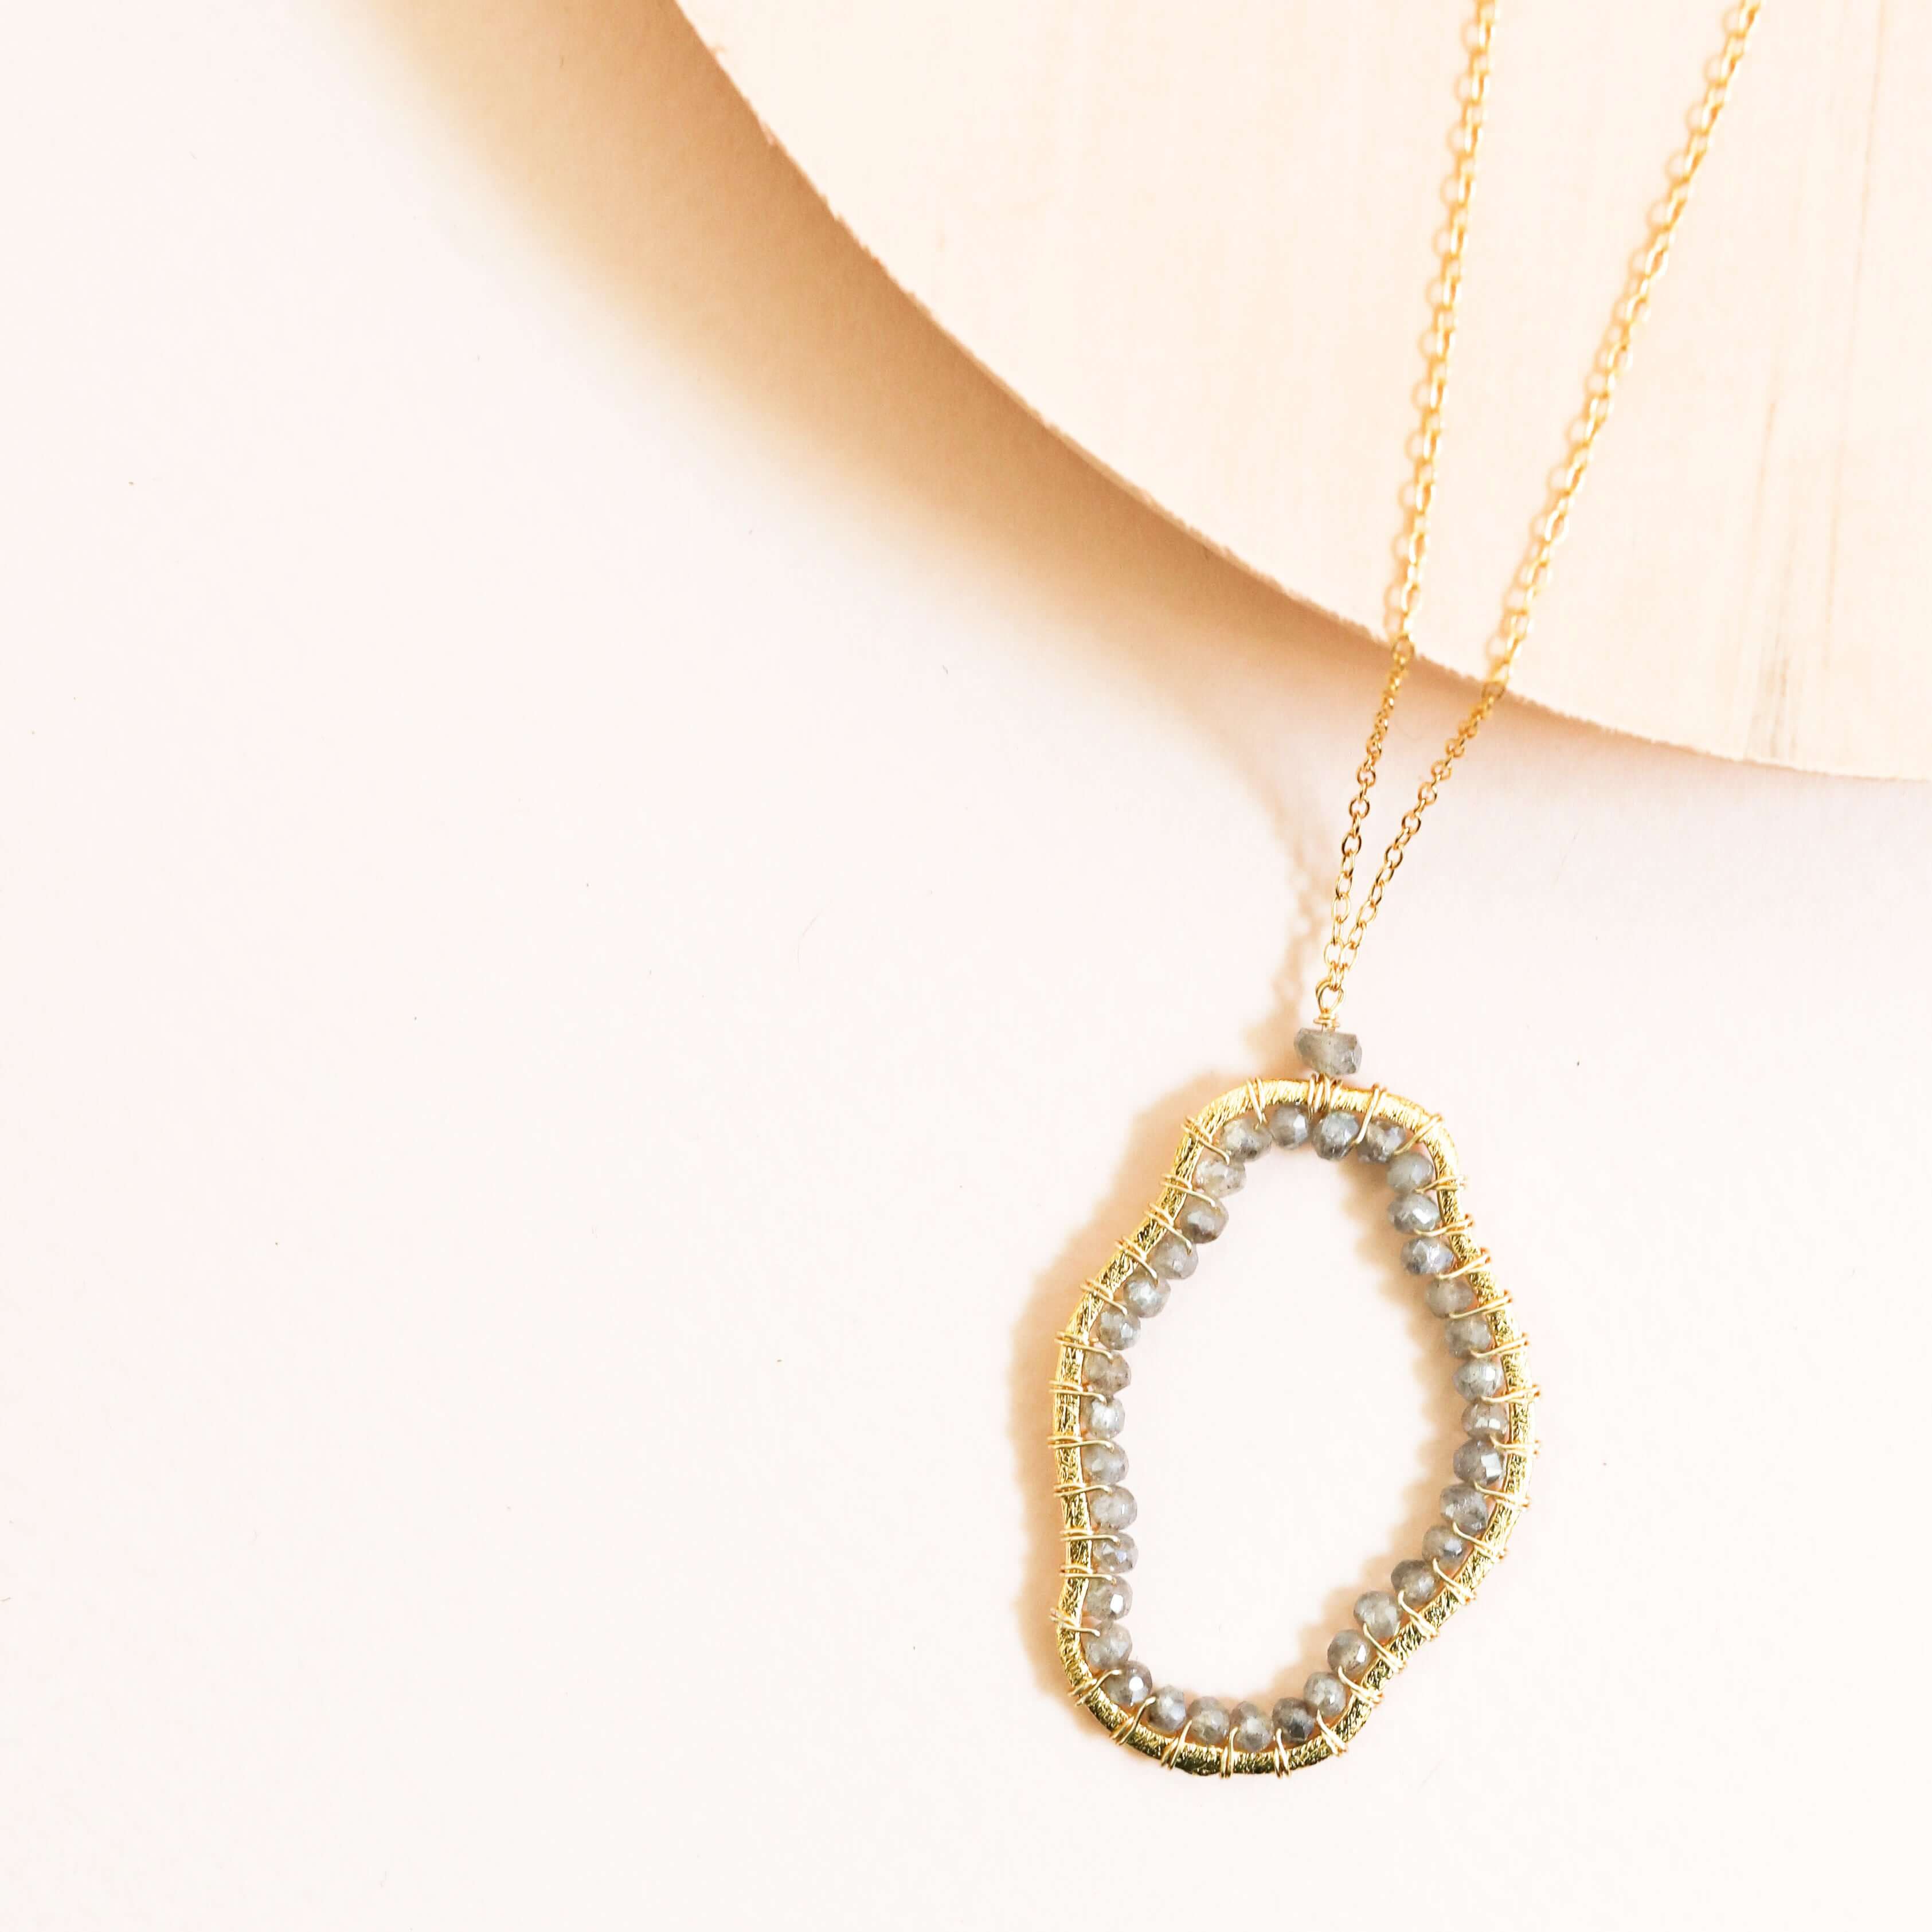 Floating Labradorite pendant delicately strung on an adjustable chain with a spring ring clasp